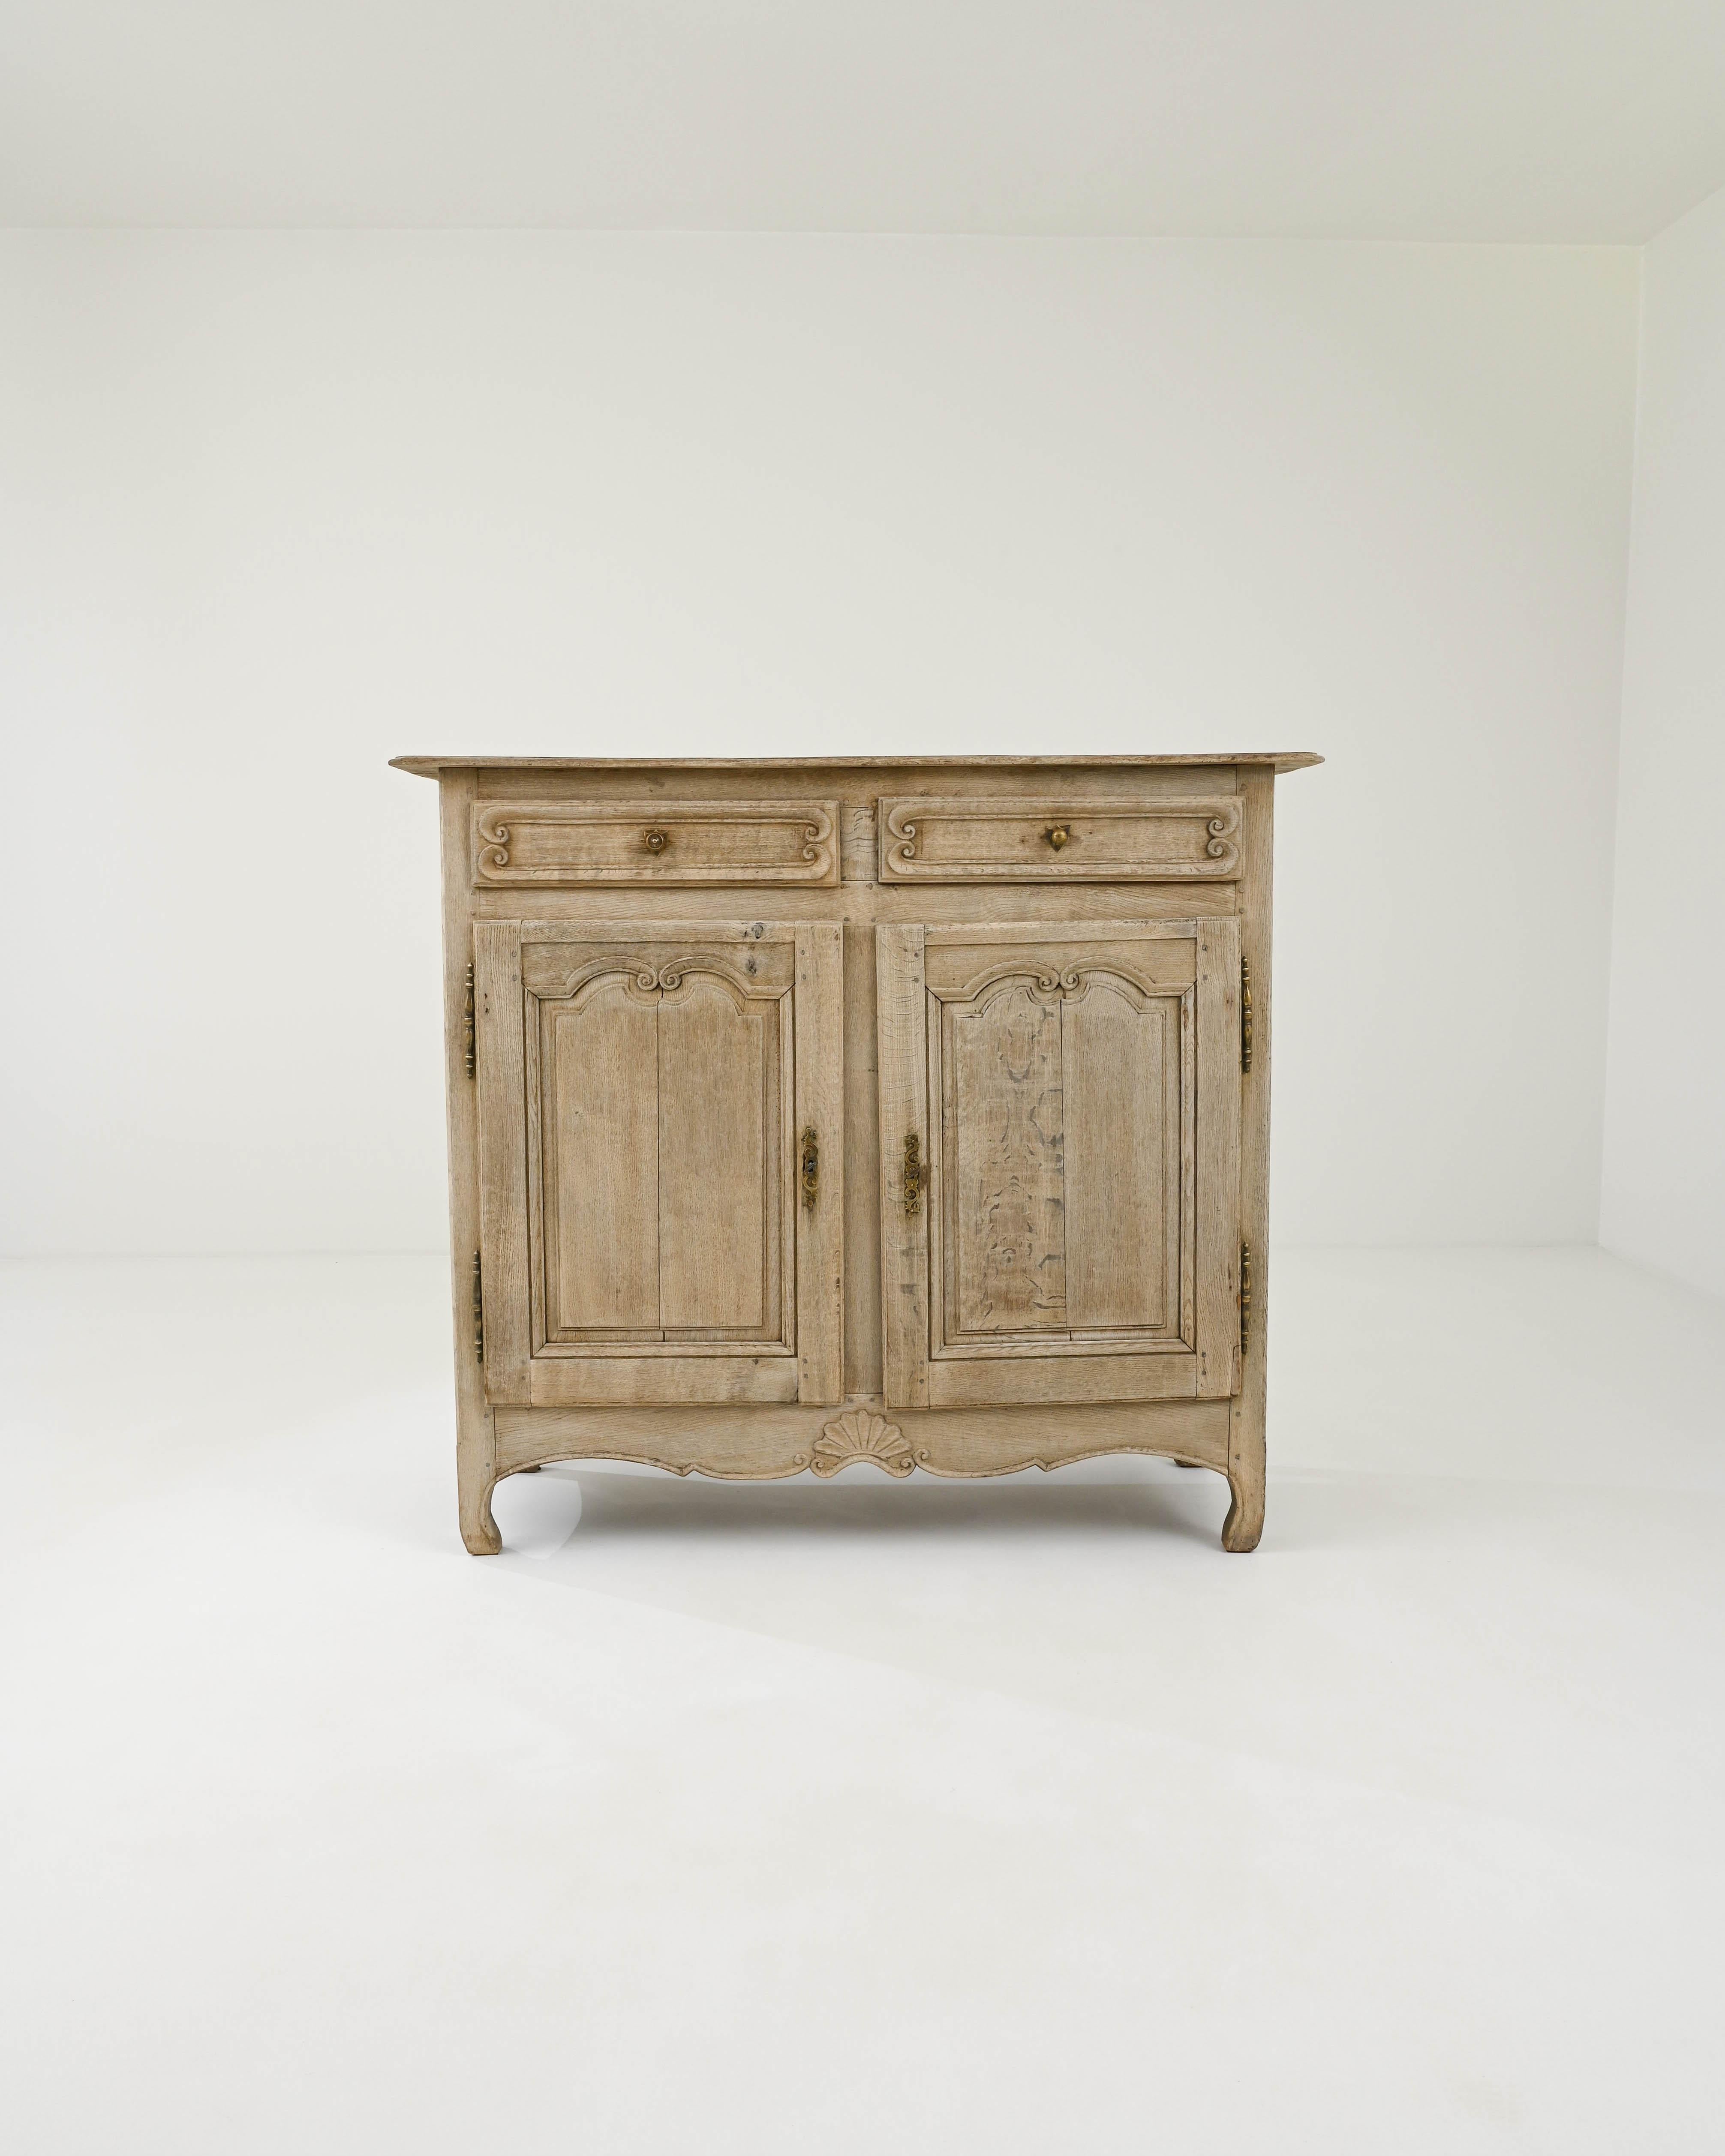 The attractive design of this Provincial oak buffet gives it a light and graceful personality despite its generous proportions. Hand-built in France in the 1800s, the upper drawers sit at shoulder height; below, cupboard doors open to reveal a